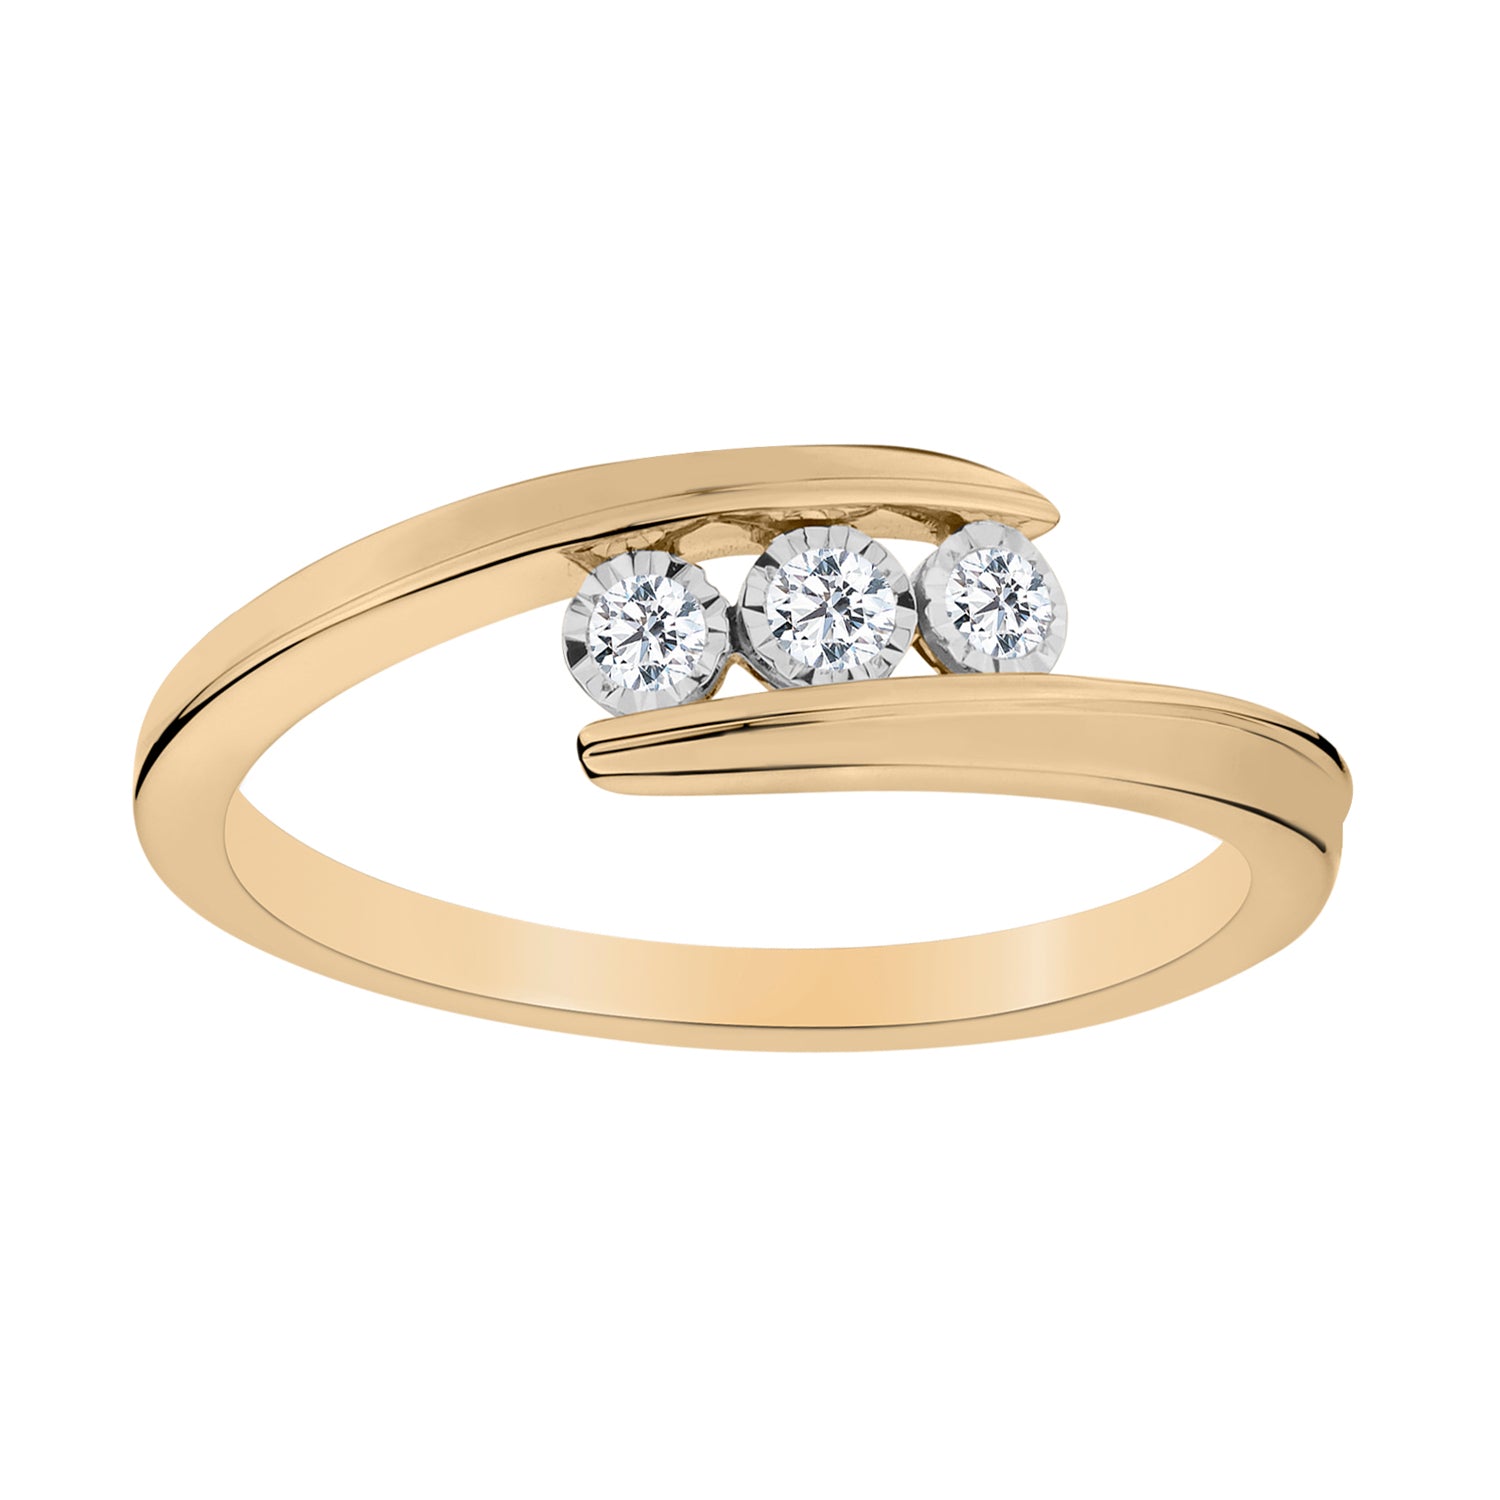 .10 CARAT "PAST, PRESENT, FUTURE" DIAMOND RING, 10kt YELLOW GOLD…...................NOW - Griffin Jewellery Designs